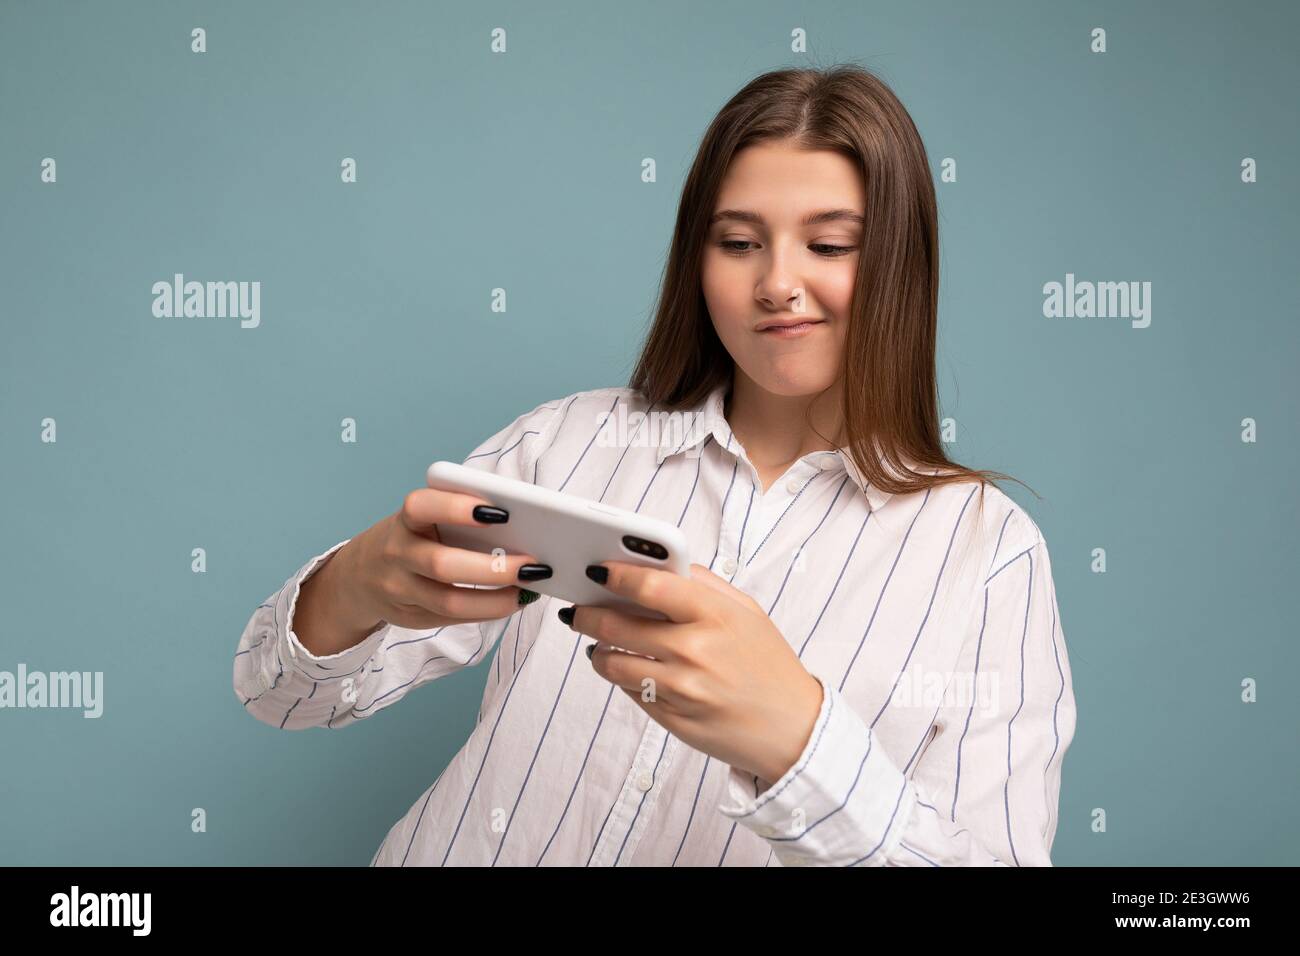 Concentrated happy attractive young blonde woman wearing casual white shirt isolated over blue background wall holding smartphone and playing online Stock Photo